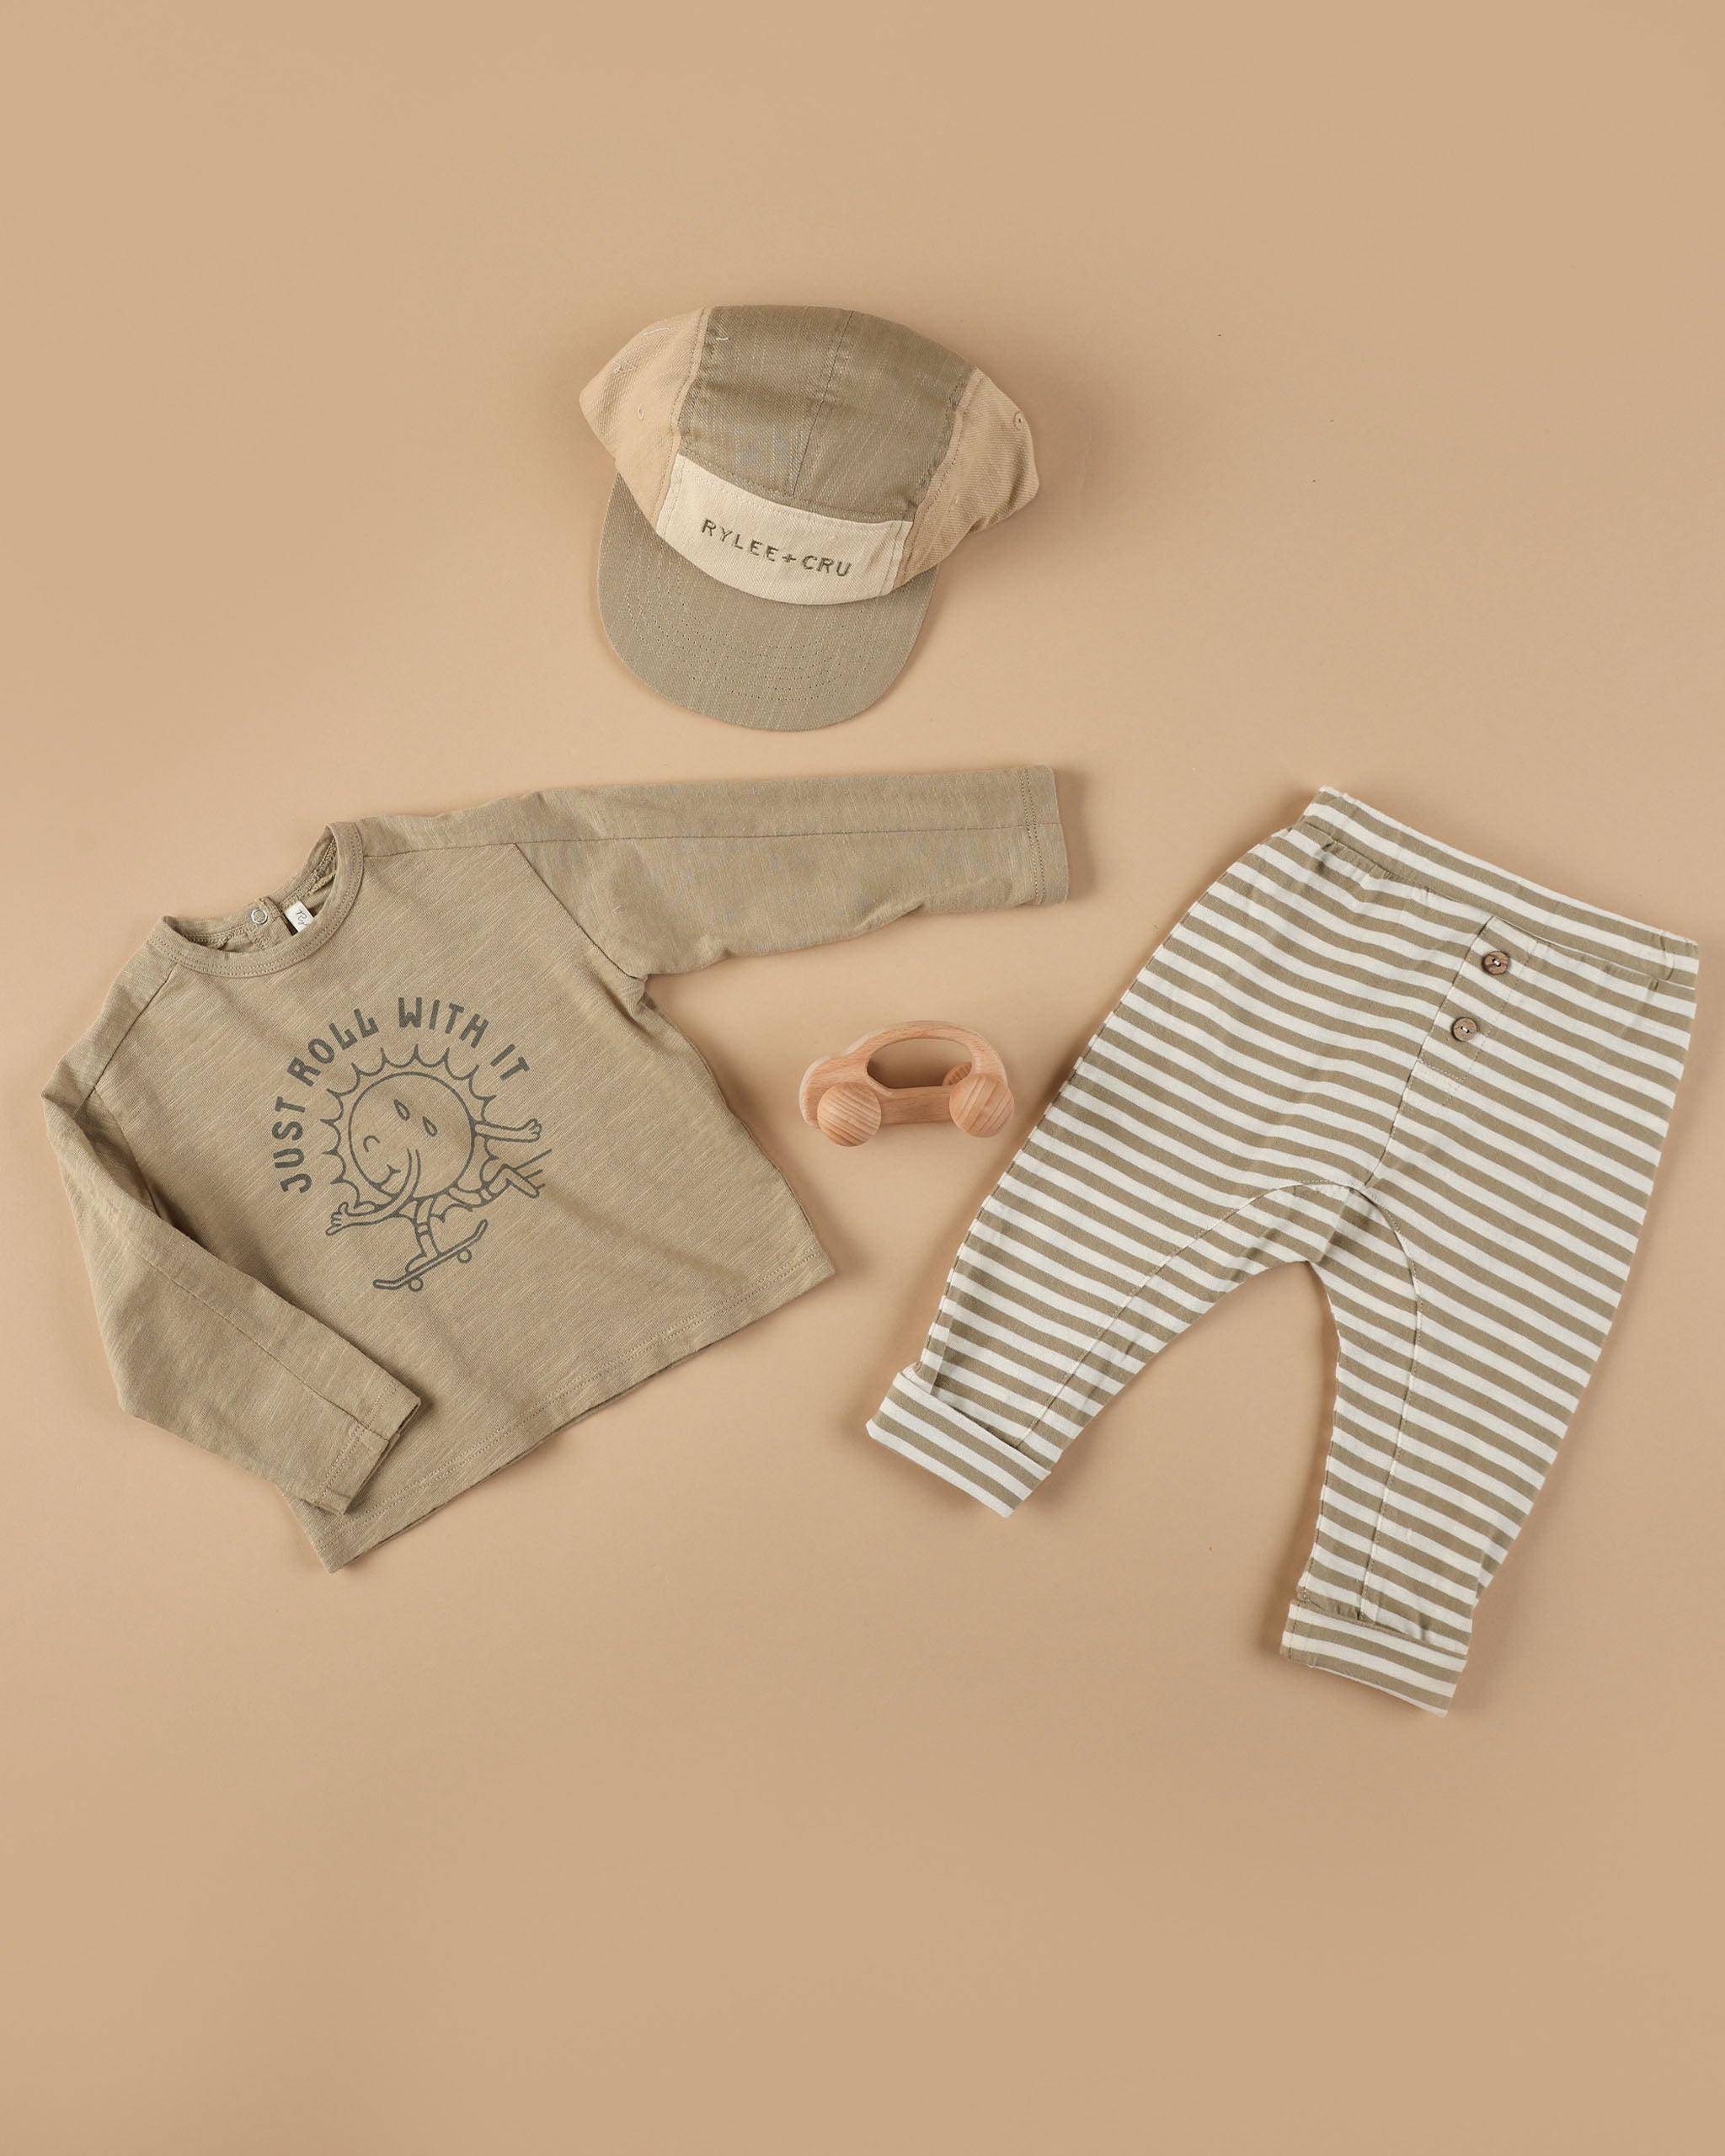 Baby Cru Pant || Fern Stripe - Rylee + Cru | Kids Clothes | Trendy Baby Clothes | Modern Infant Outfits |